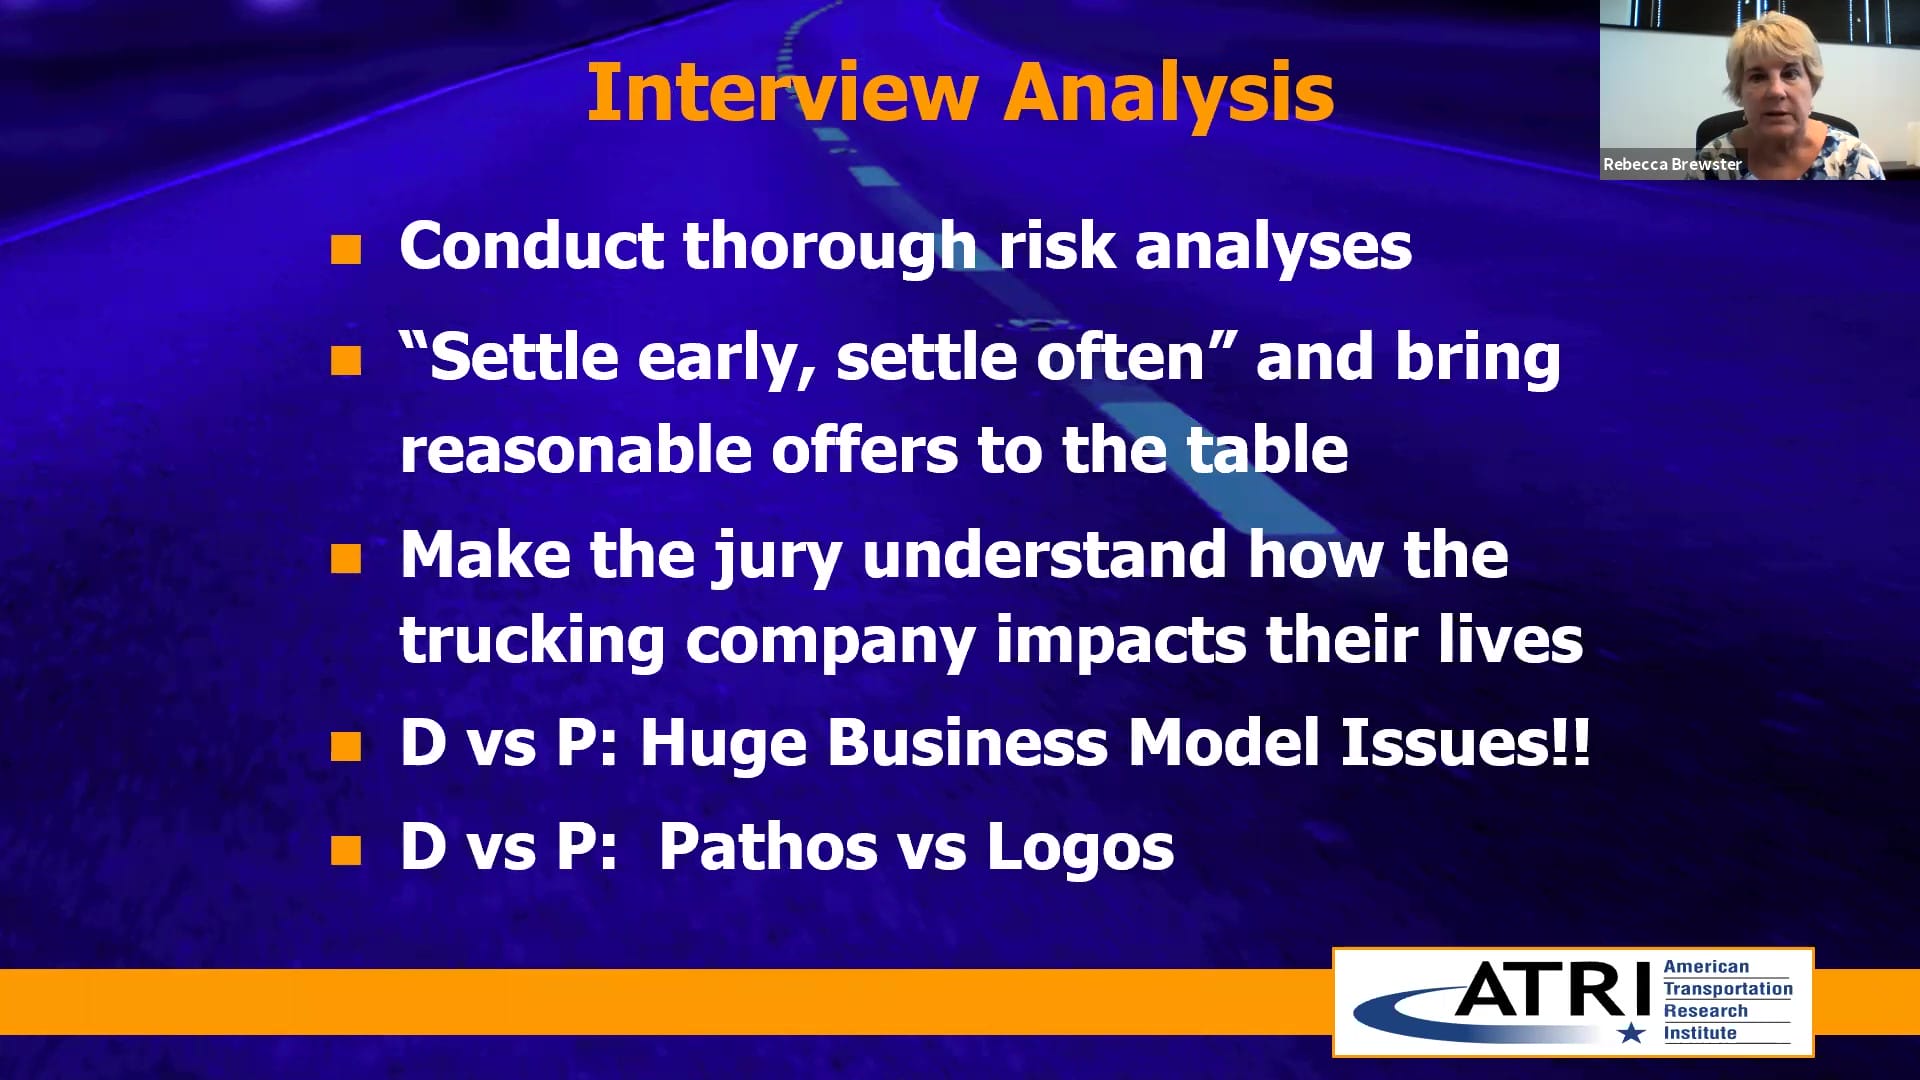 Trucking Industry Concerns 2020 from ATRI Nuclear Verdict Interview Analysis